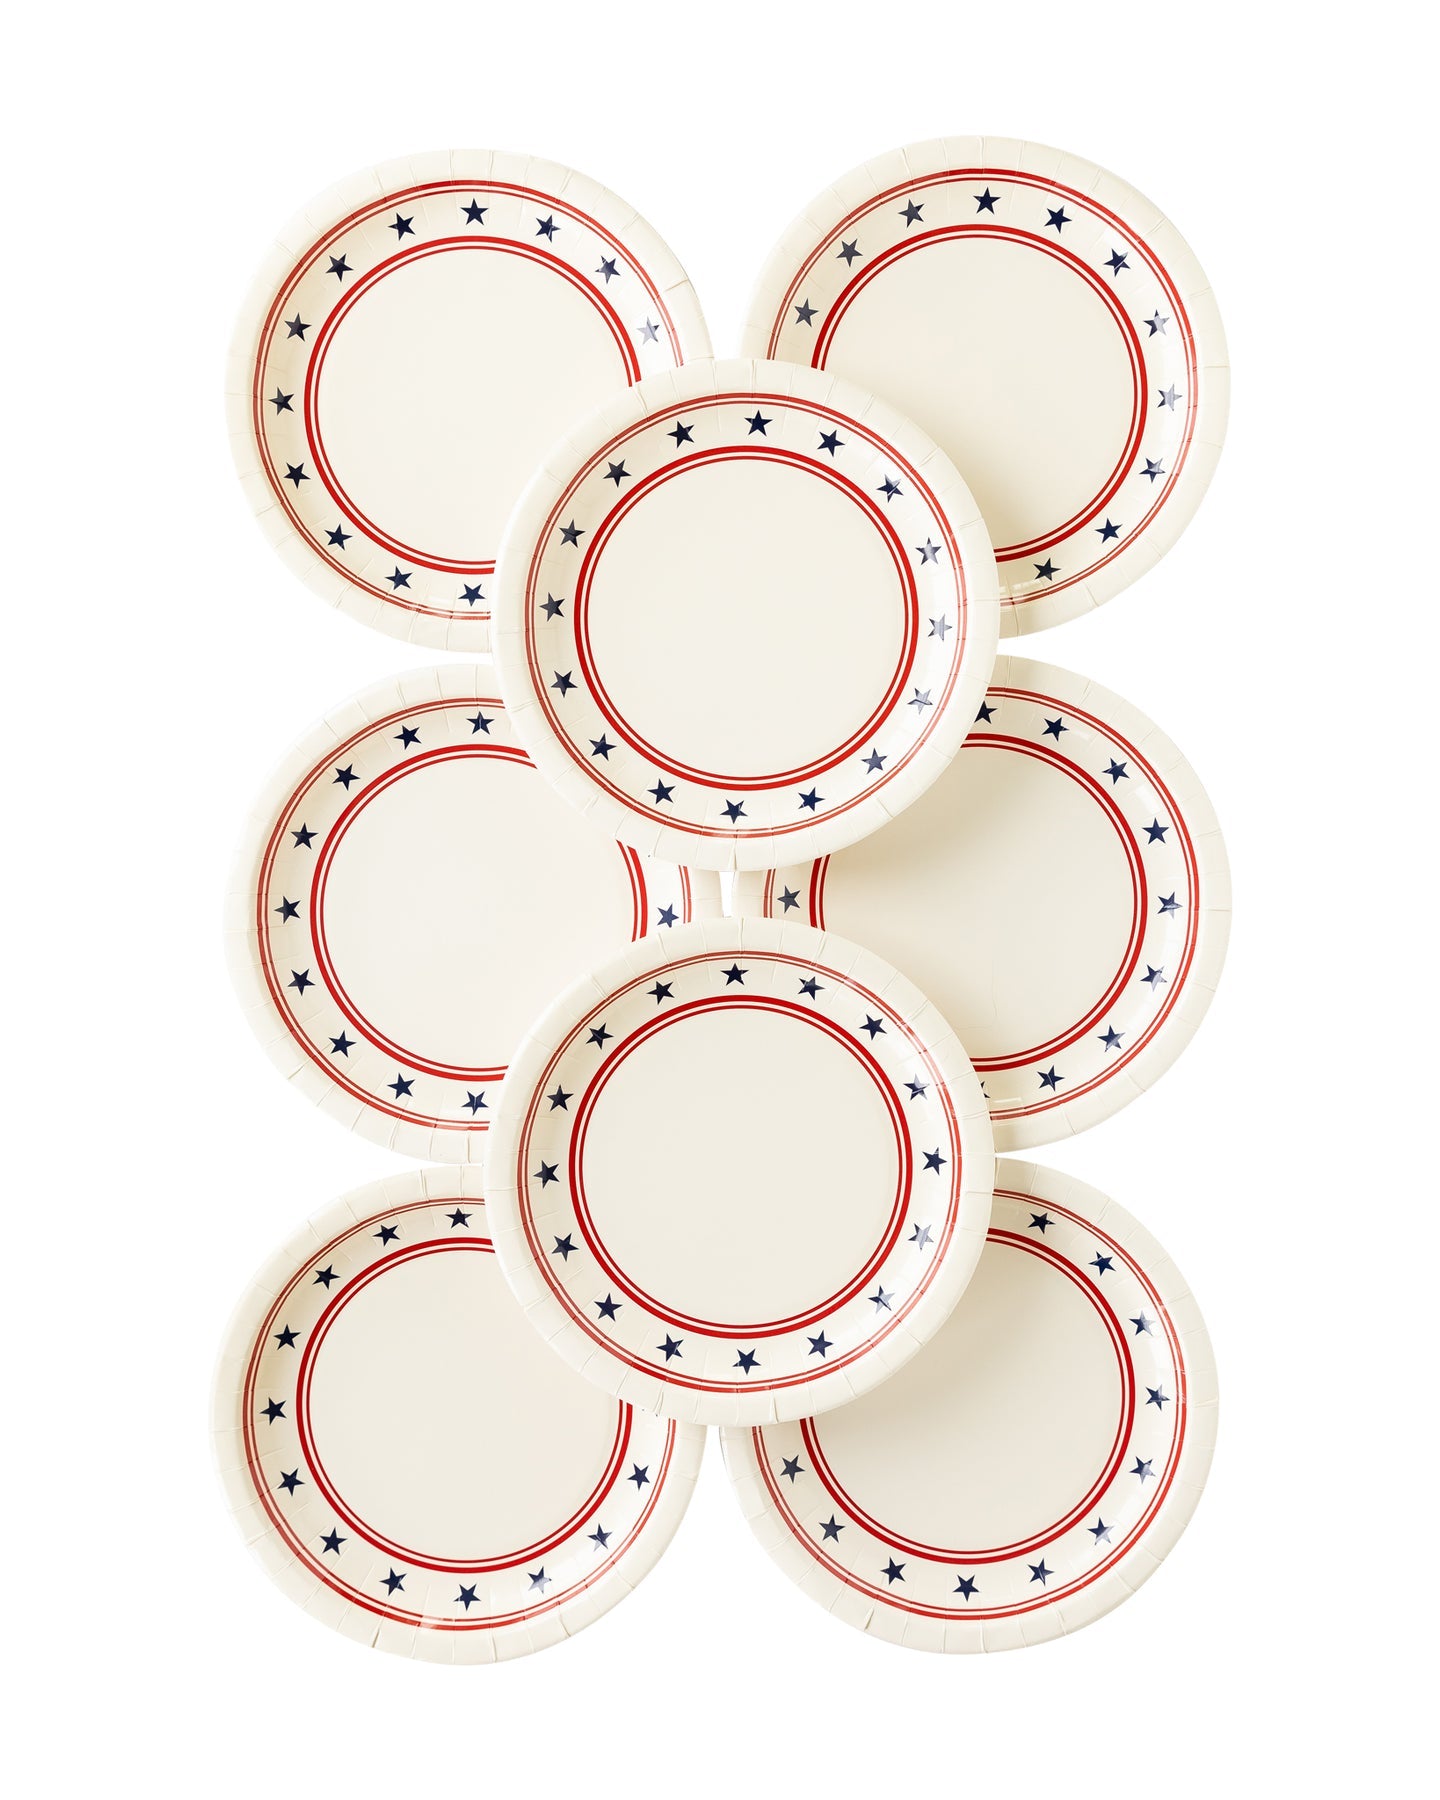 STARS AND STRIPES PLATES - 9 in